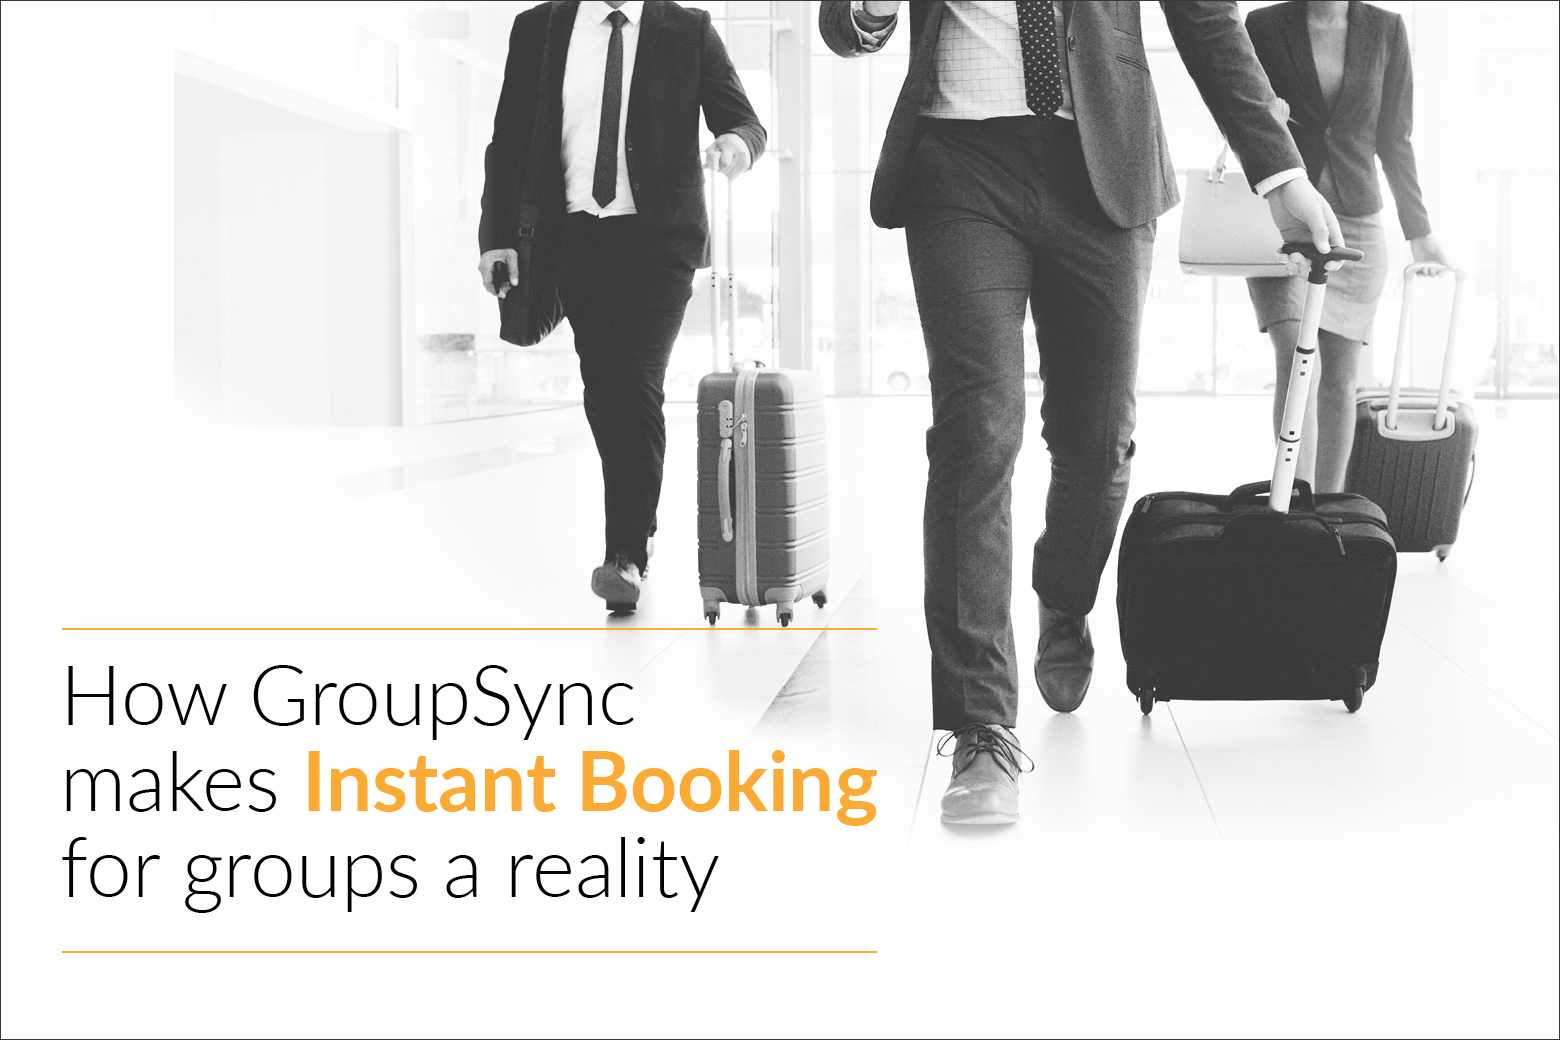 How GroupSync makes Instant Booking for groups a reality.